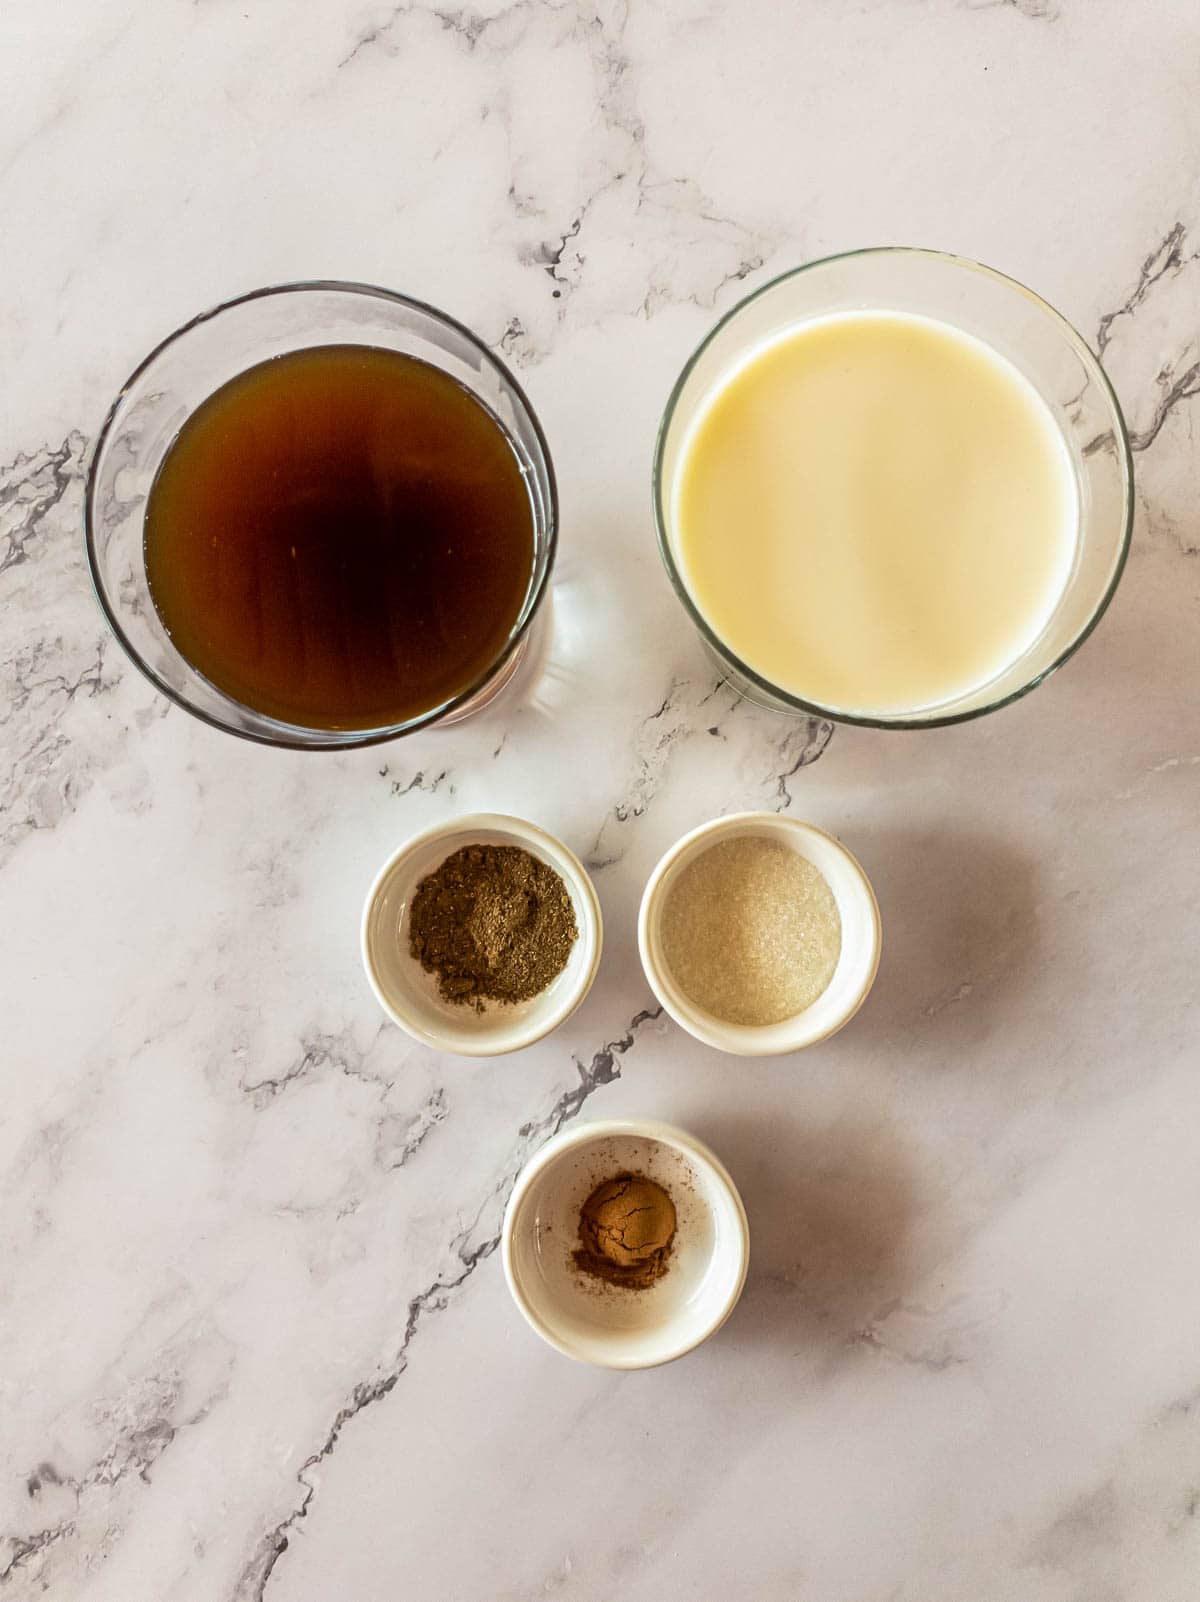 Ashwagandha coffee ingredients arranged over marble background in individual bowls.